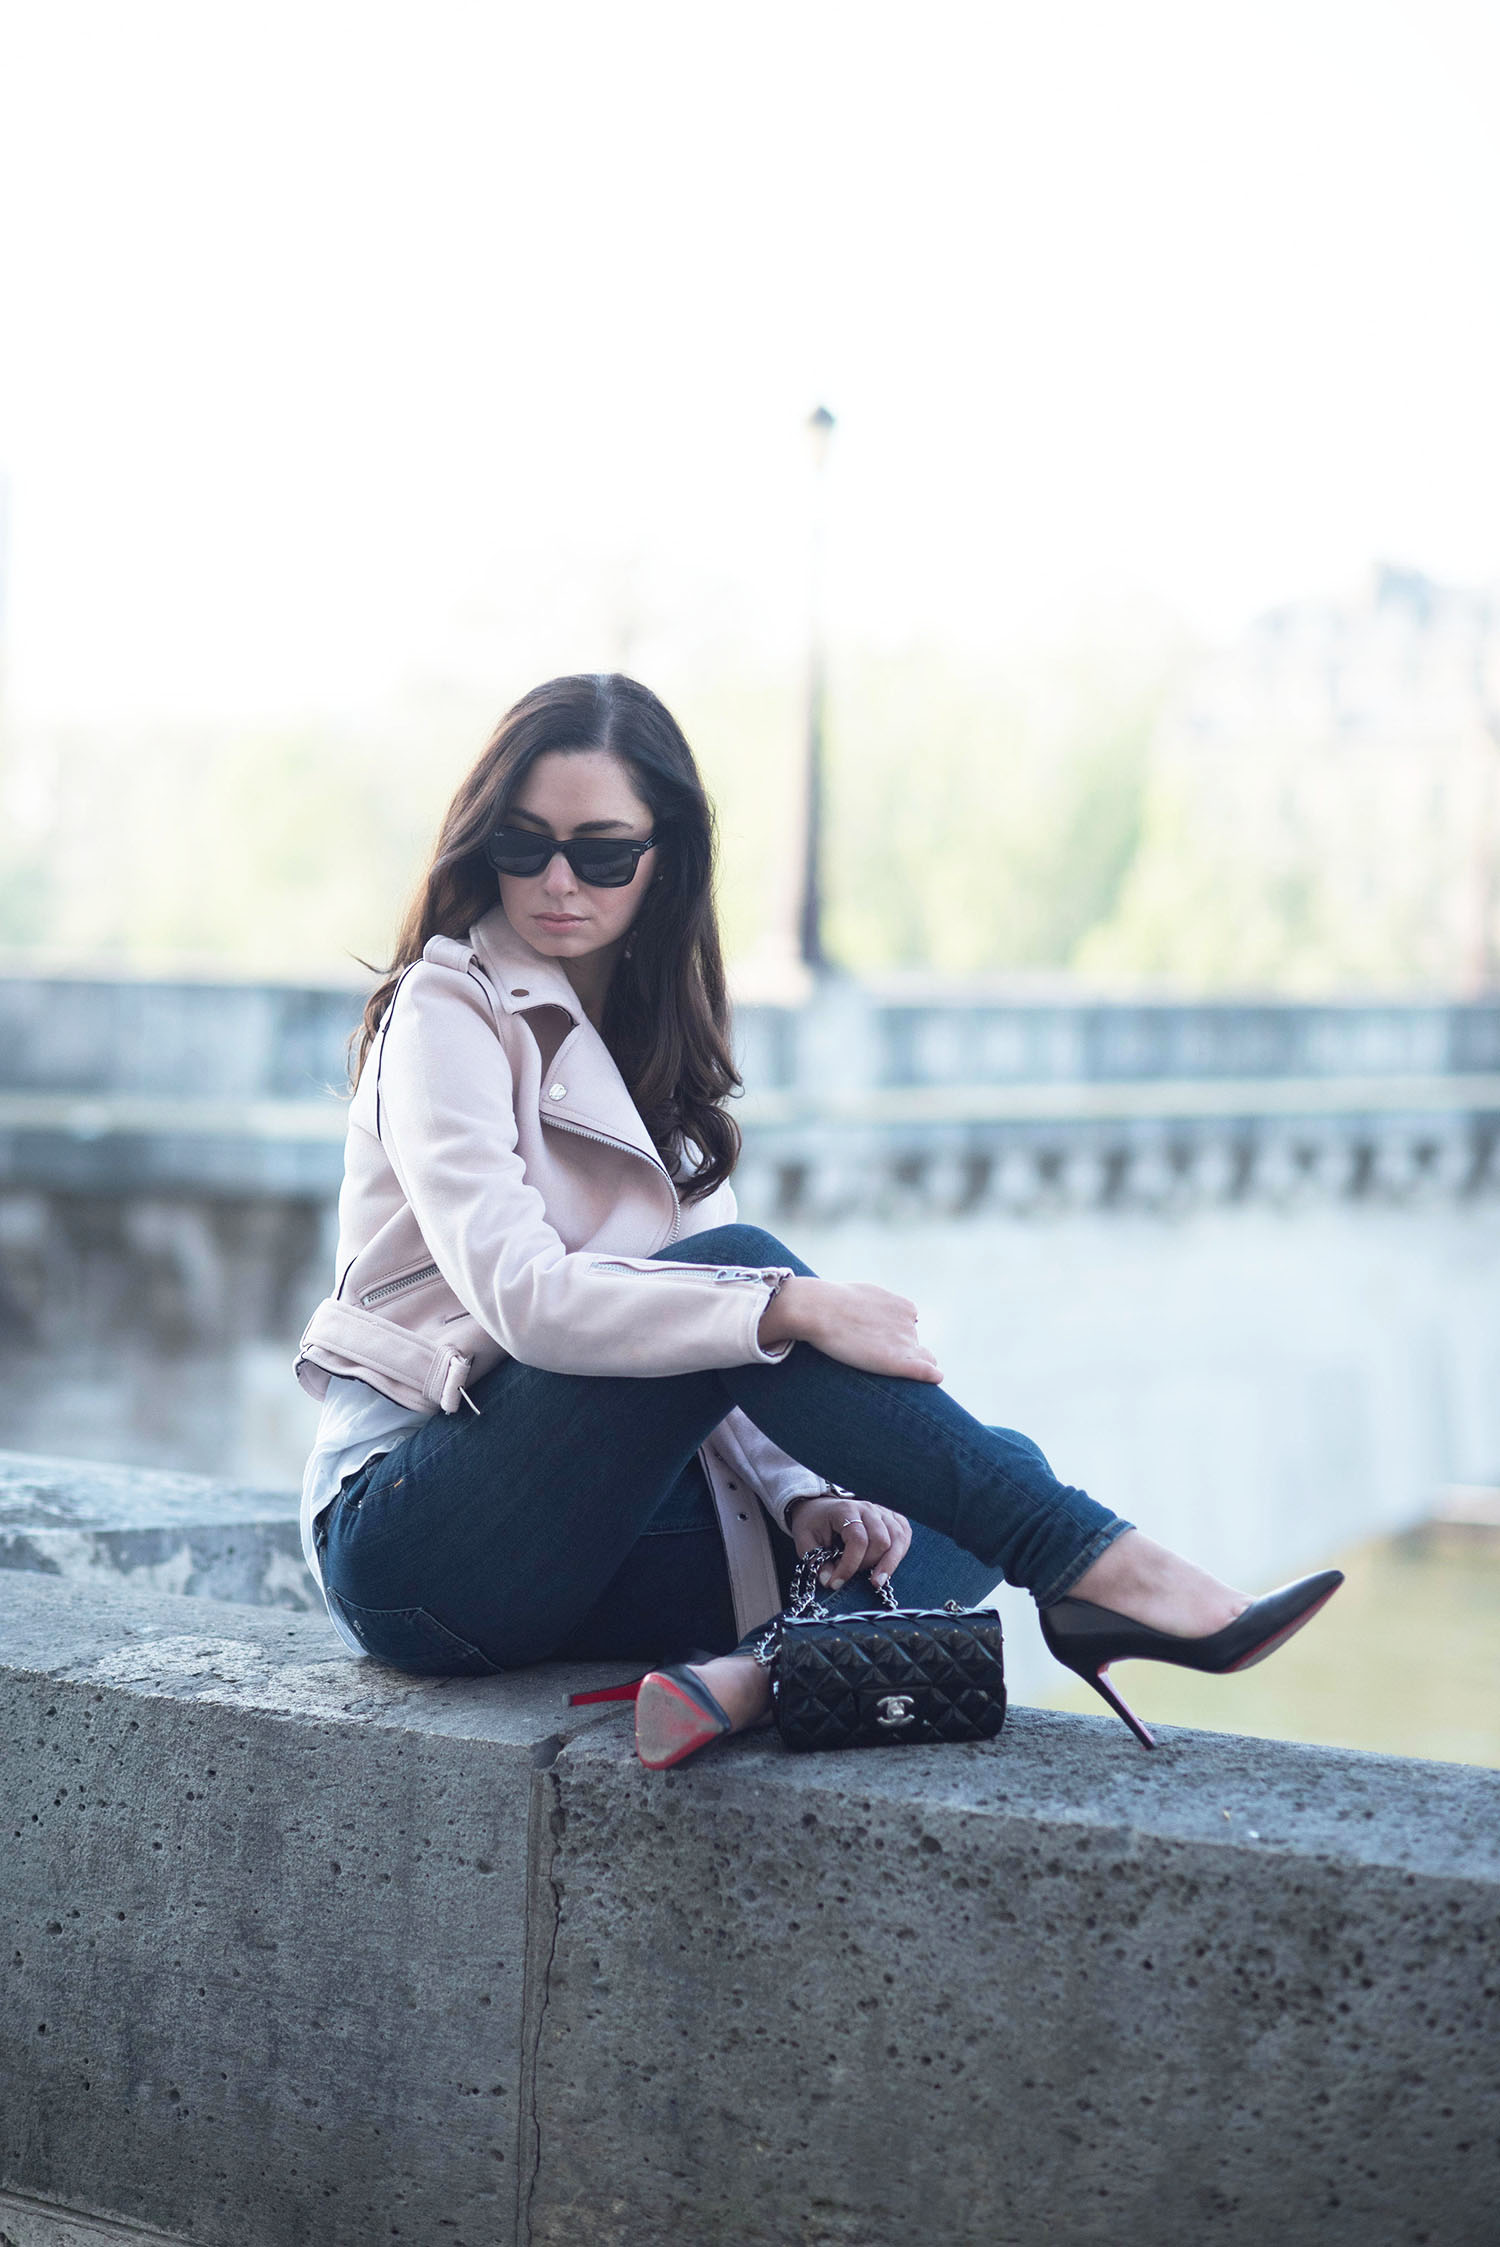 Style blogger Cee Fardoe of Coco & Vera sits on the quad in Paris wearing Christian Louboutin Pigalle pumps and pink Zara jacket